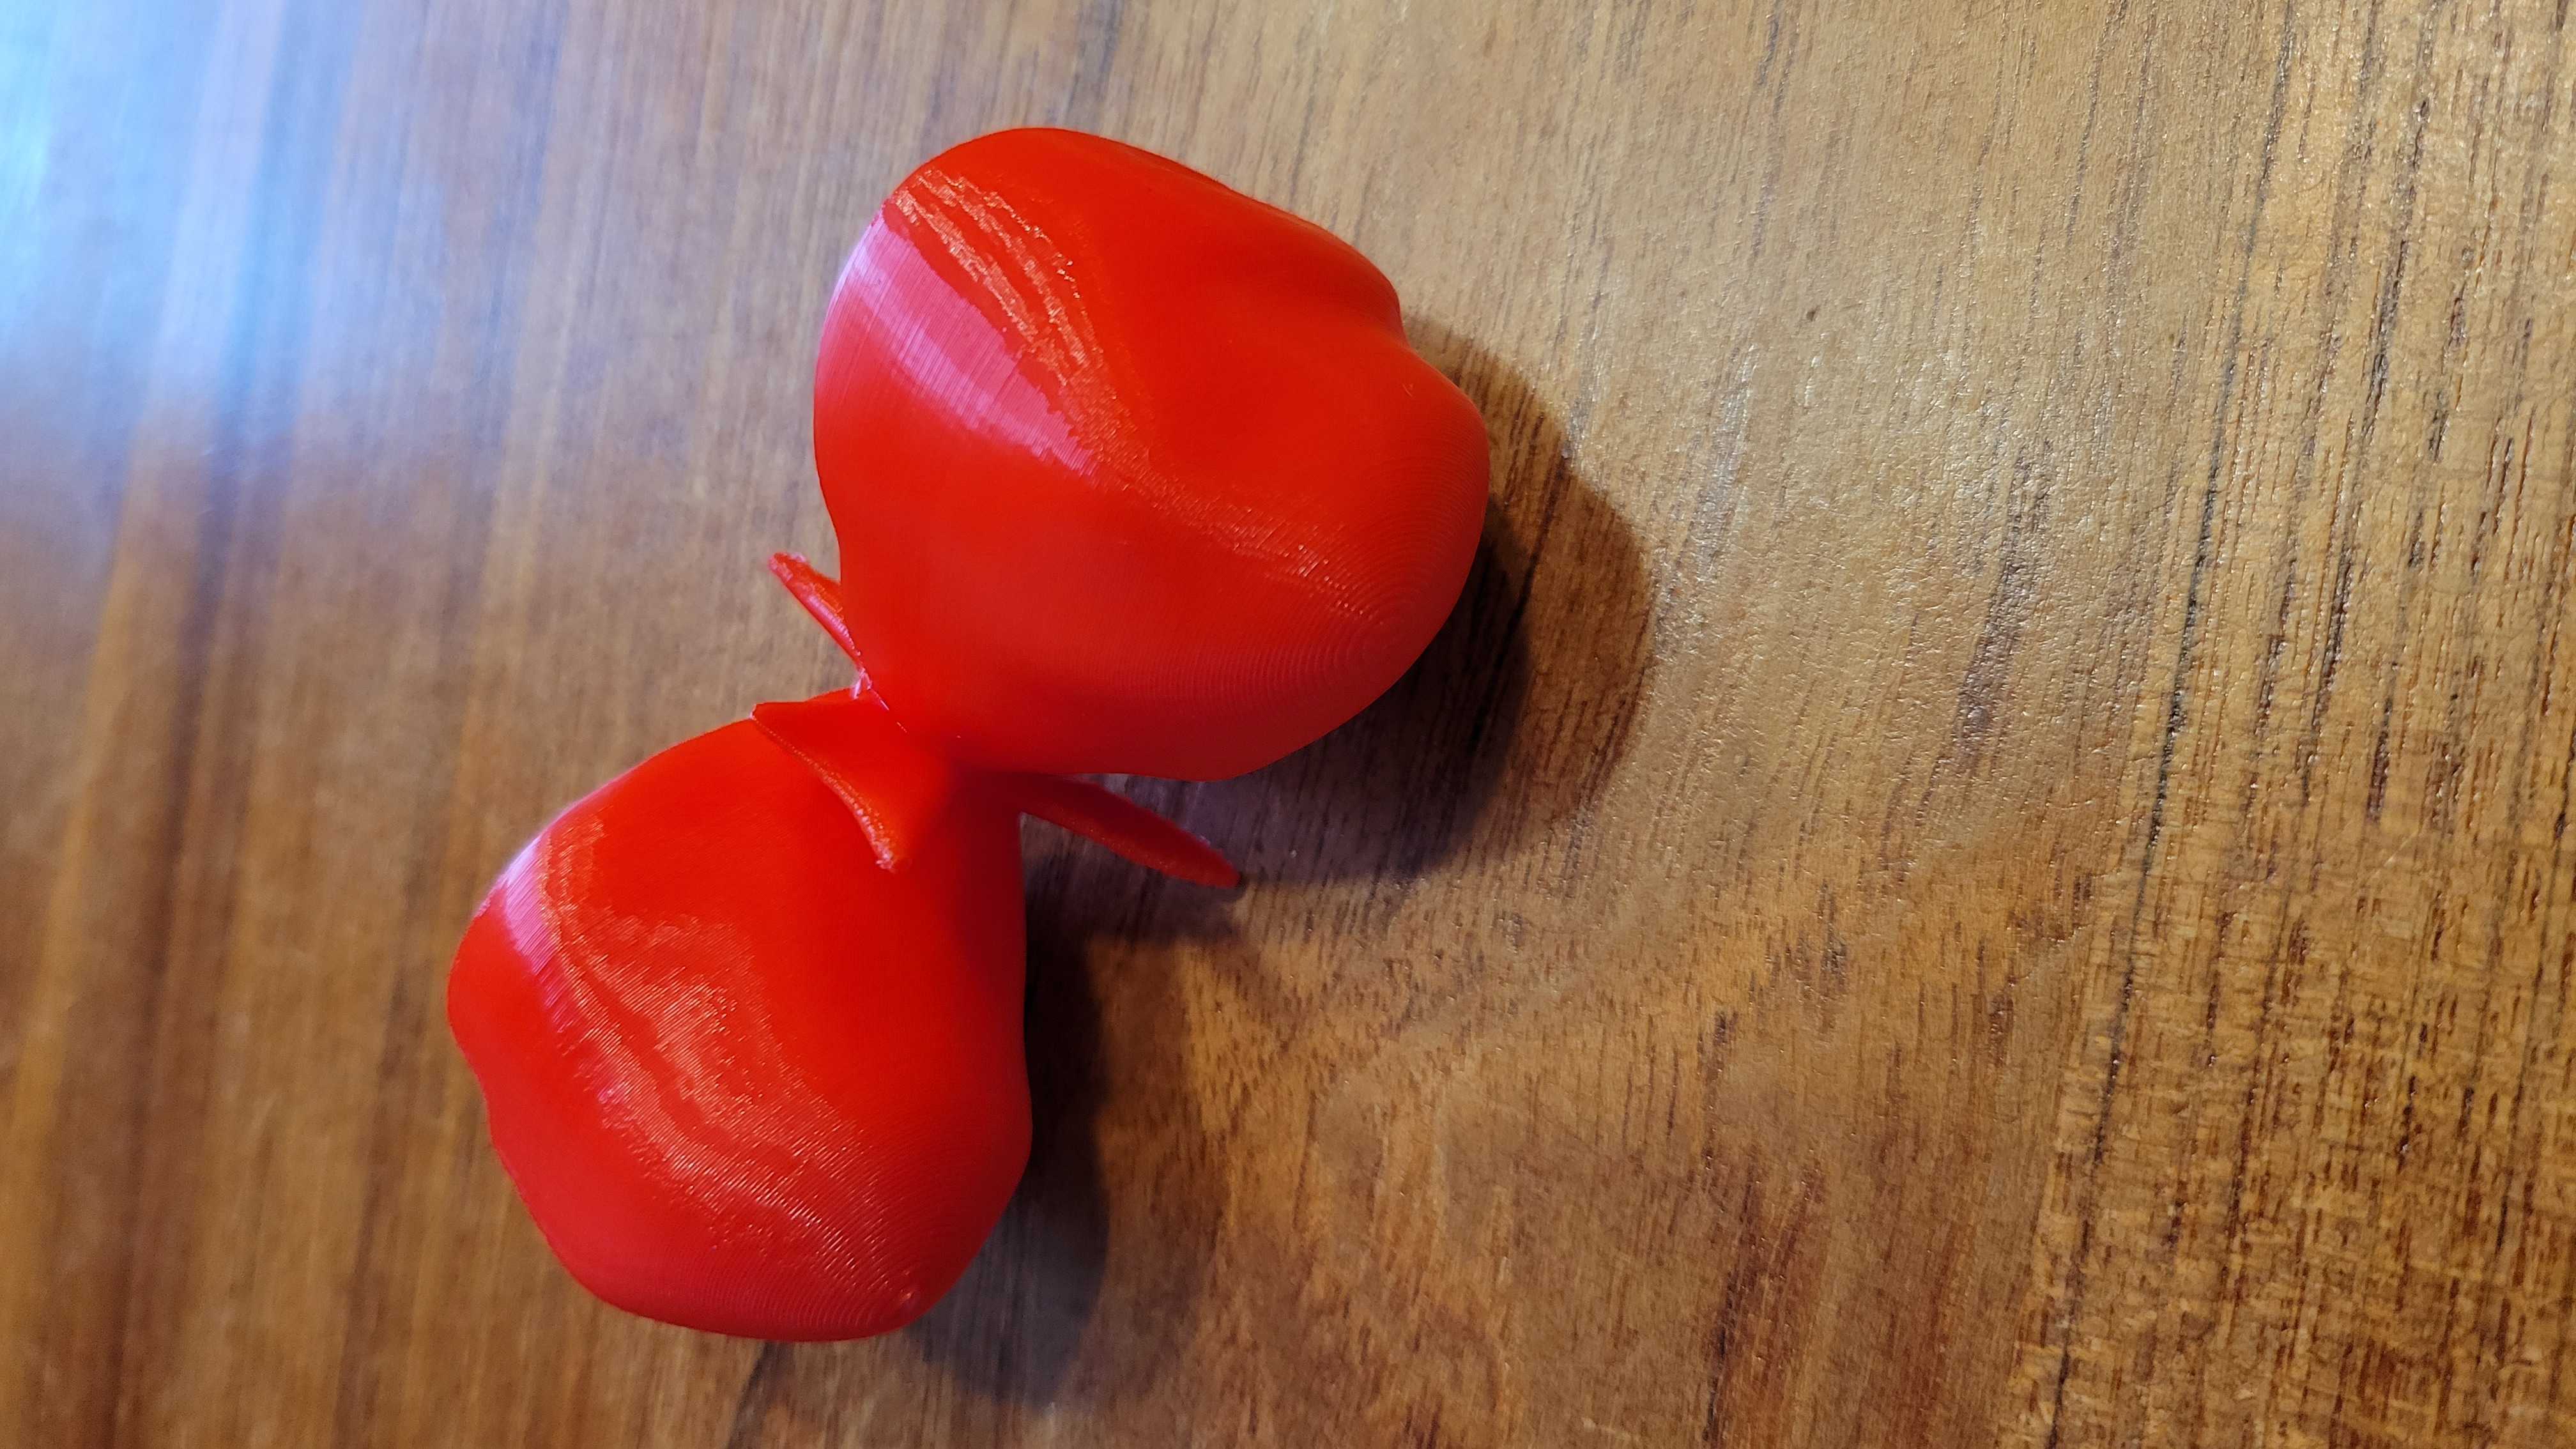 Photo of a 3D print of Eta Carinae, a mature star system. The print is about 5 inches in length and built from red plastic. The mode looks like a butterfly whose wings have been replaced by 2 small balloons that meet from end to end.